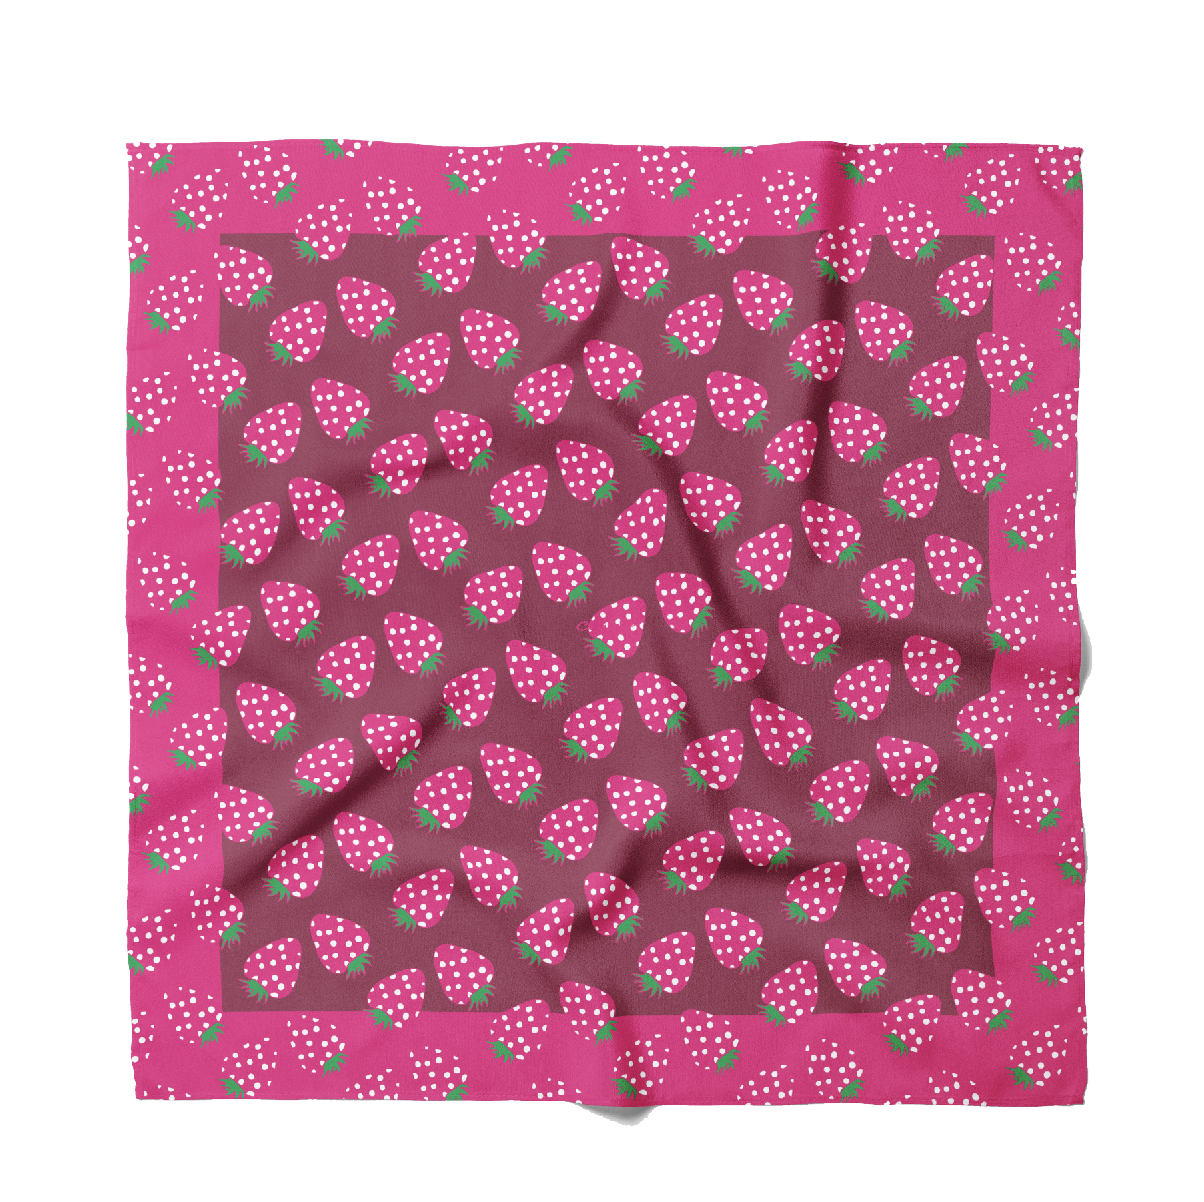 A pink and green bandana with strawberries on it.